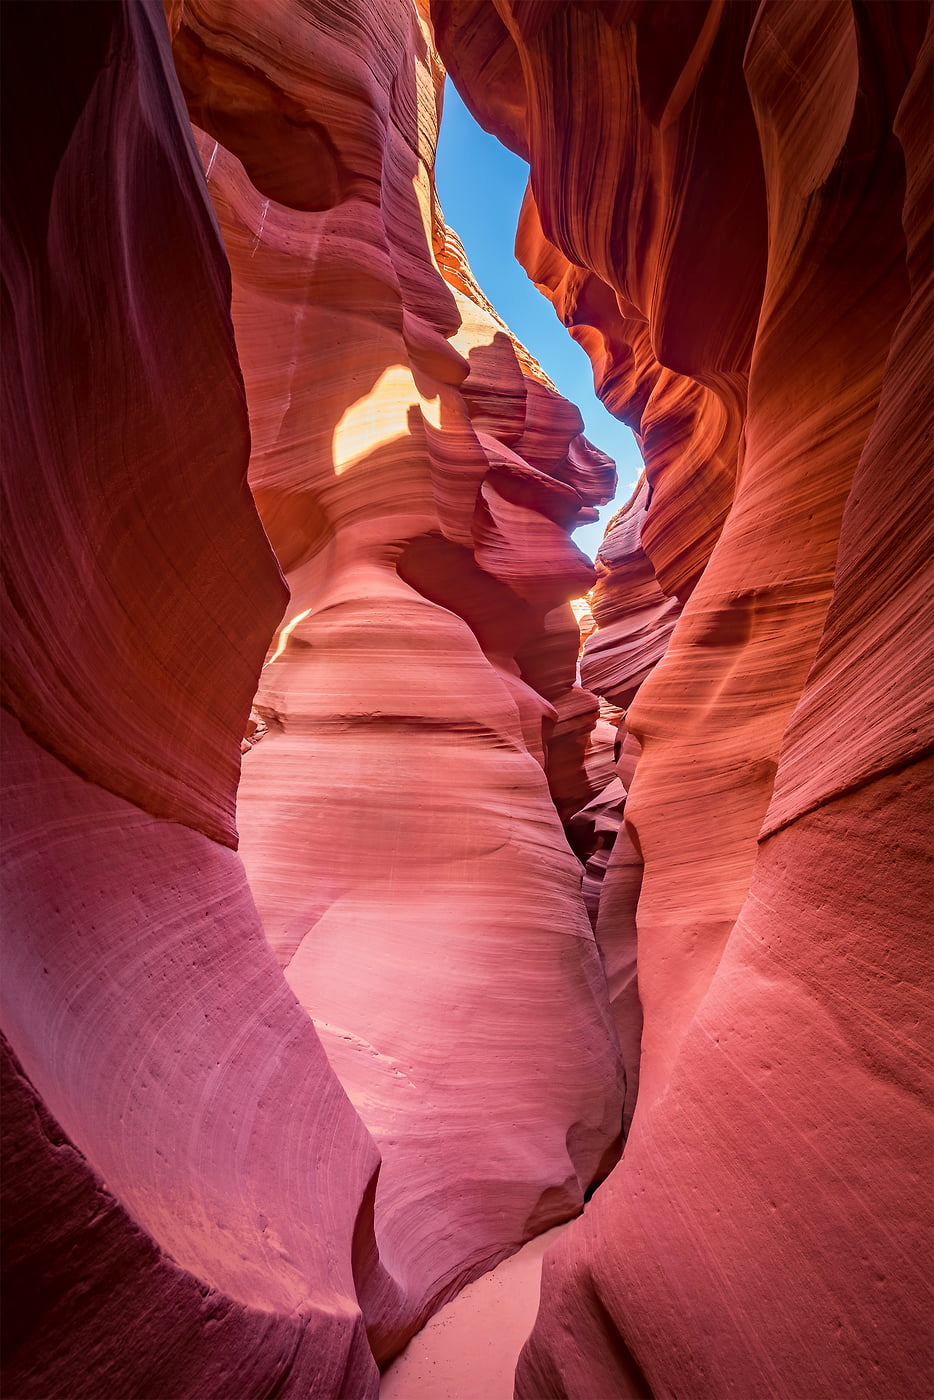 137 megapixels! A very high resolution, large-format VAST photo print of Antelope Canyon; abstract nature photo created by Justin Katz in Arizona